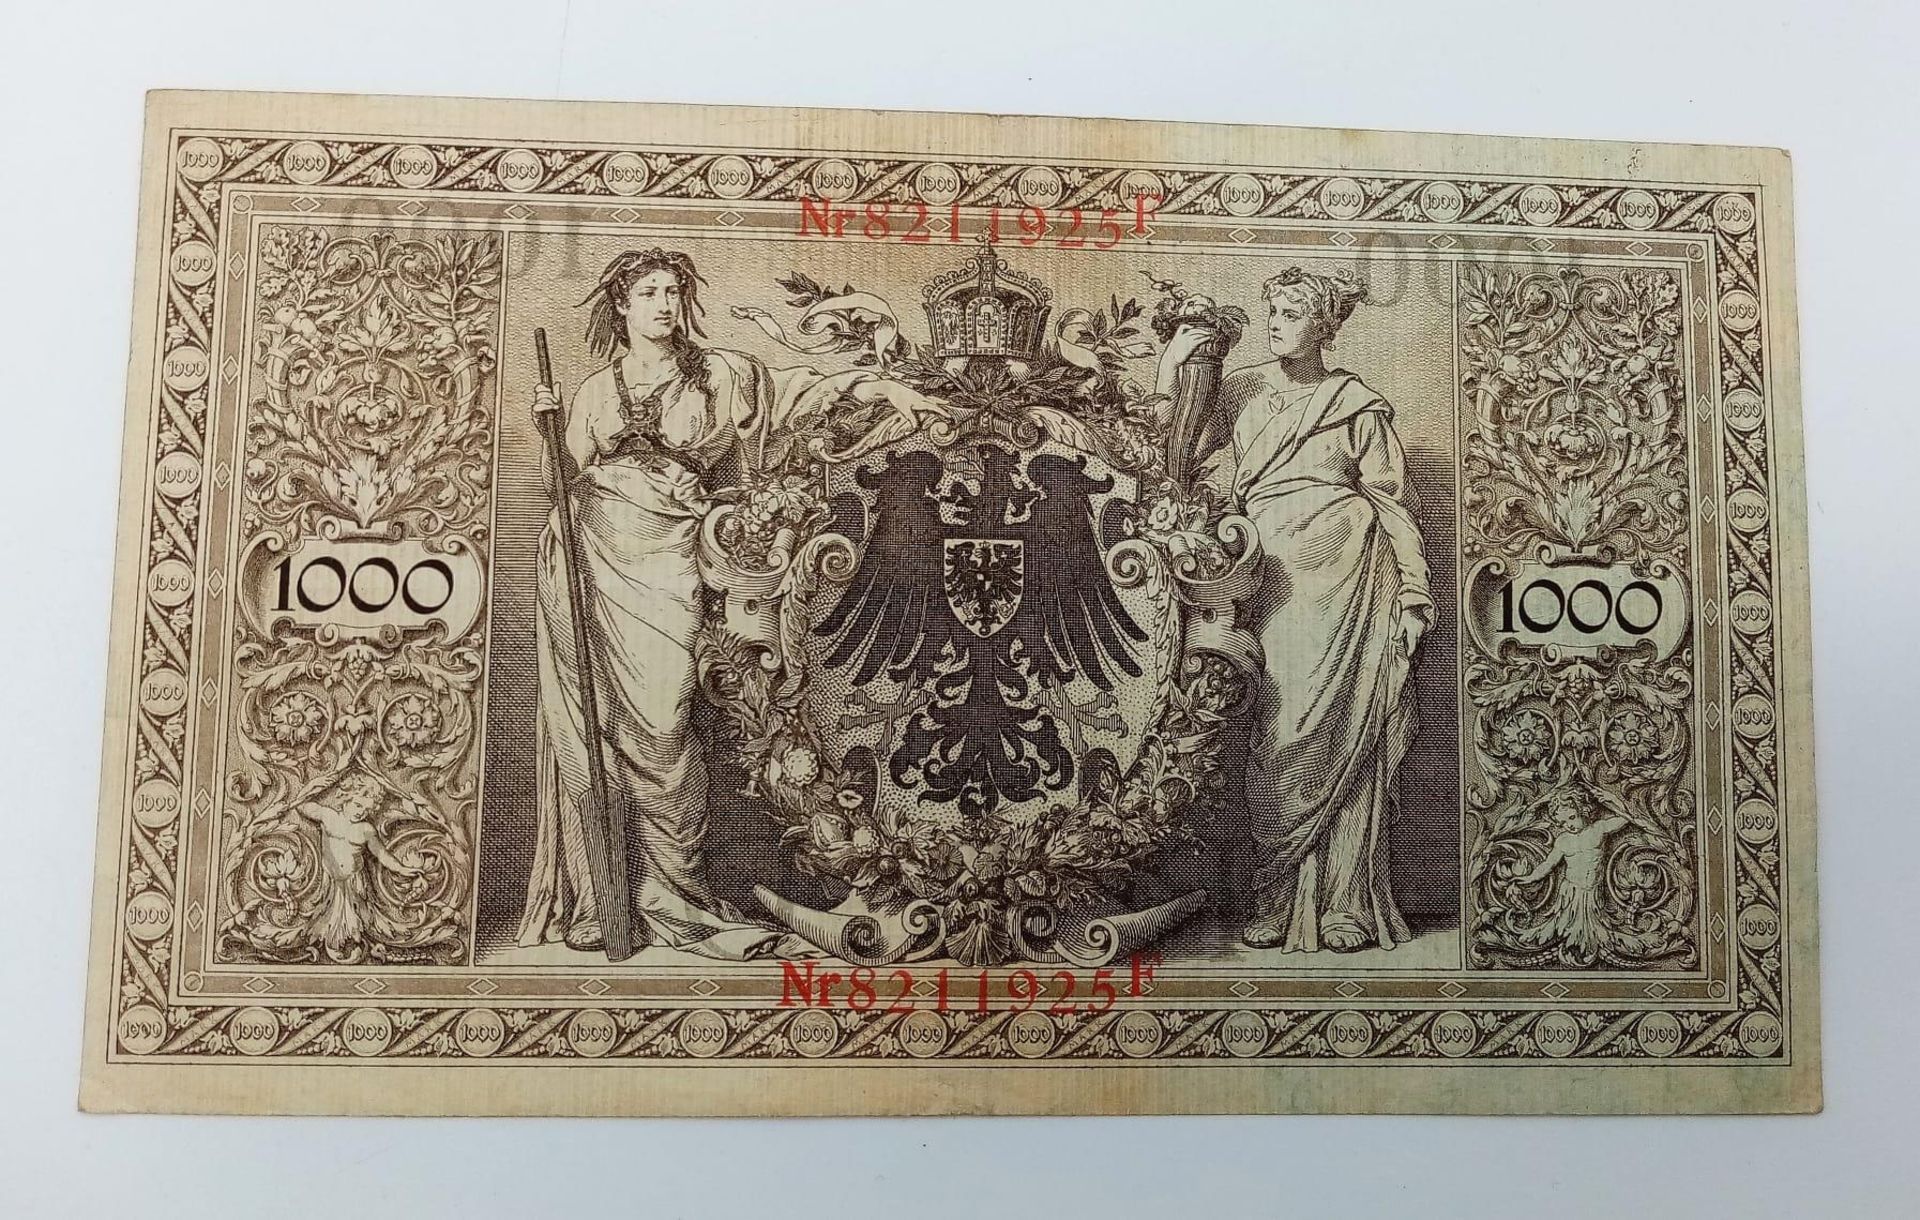 A 1910 German 1000 Mark Bank Note. Very good condition. - Image 2 of 2